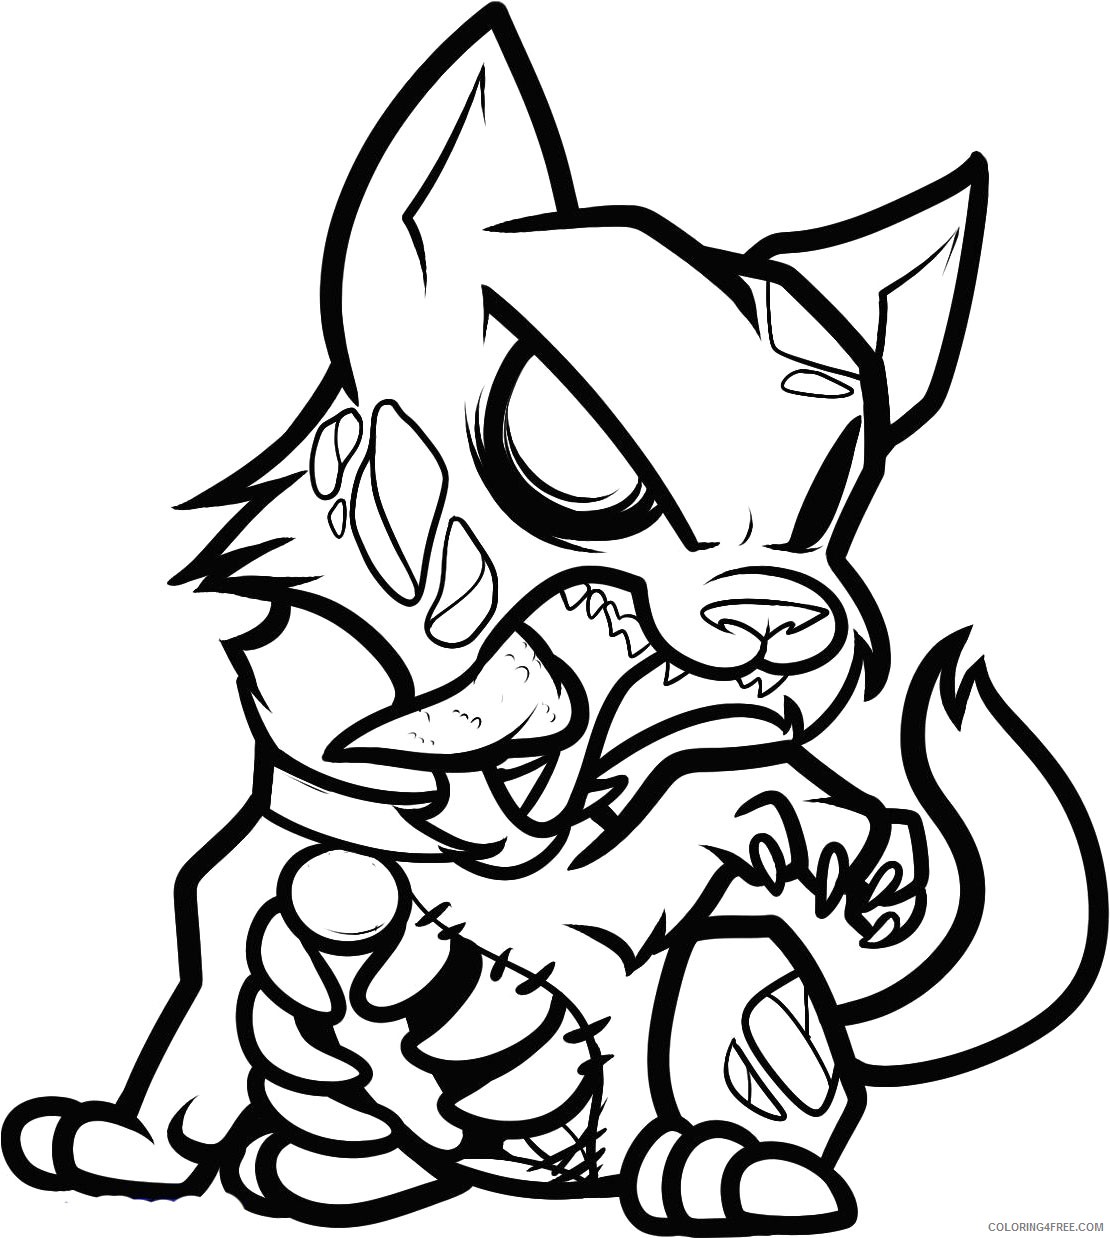 werewolf zombie coloring pages Coloring4free